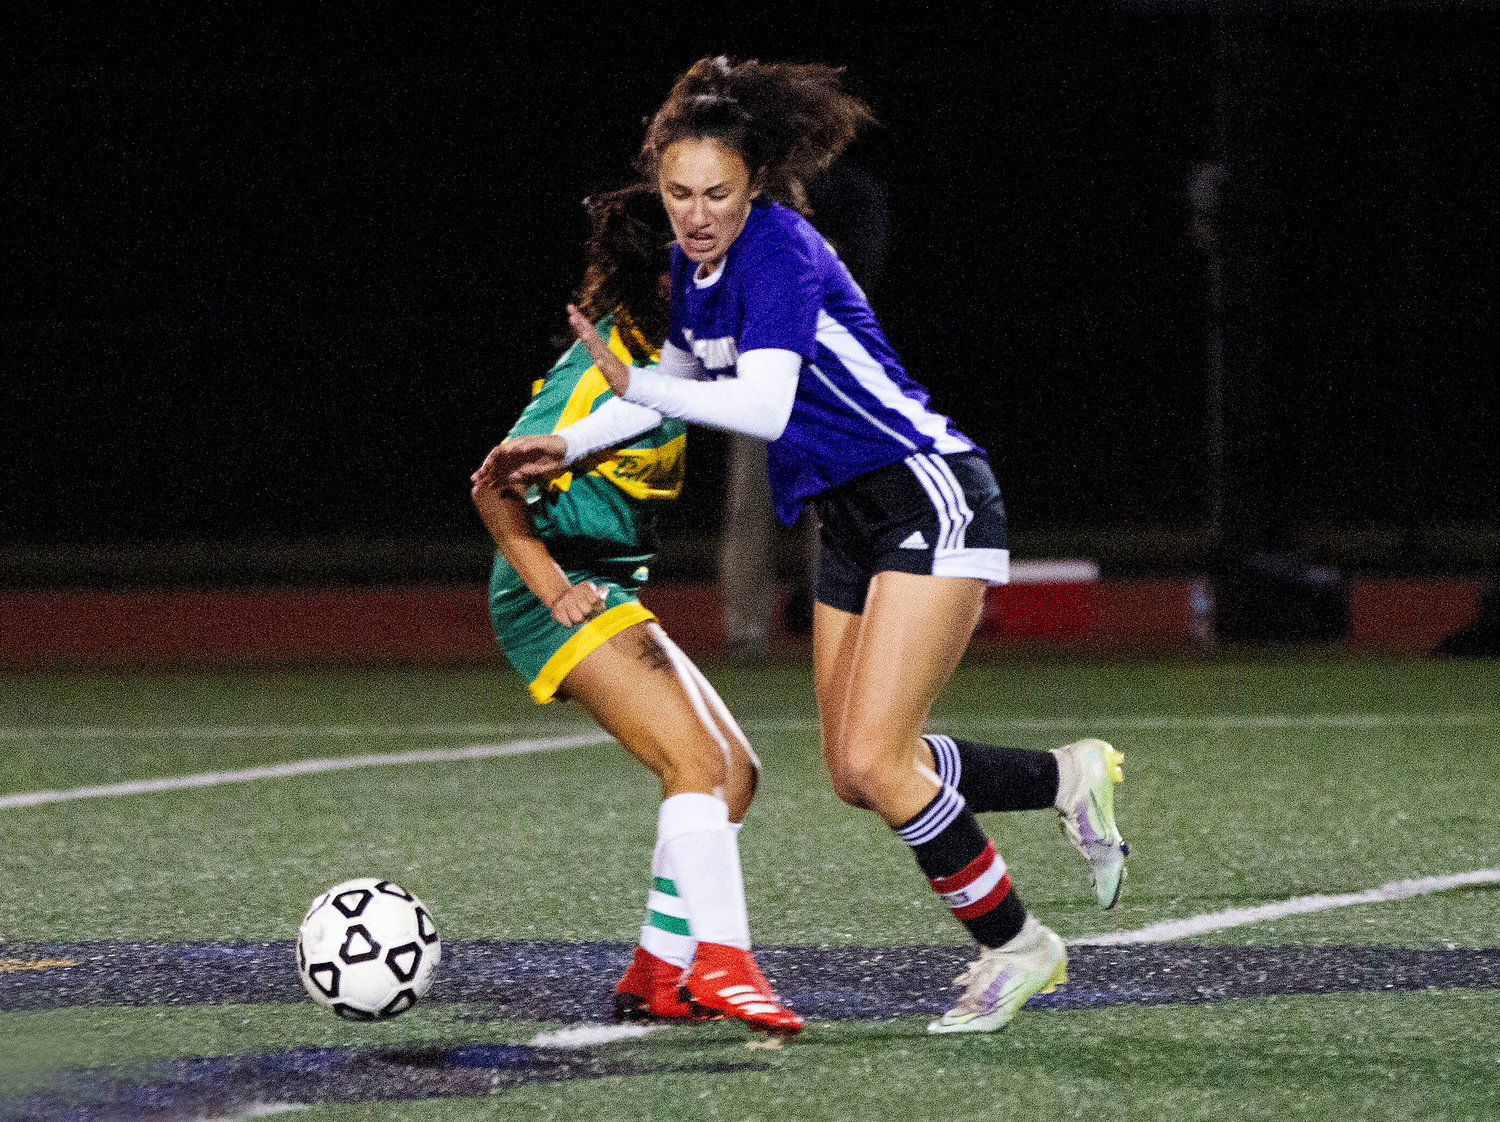 Emma Goglia fights for a loose ball at midfield.